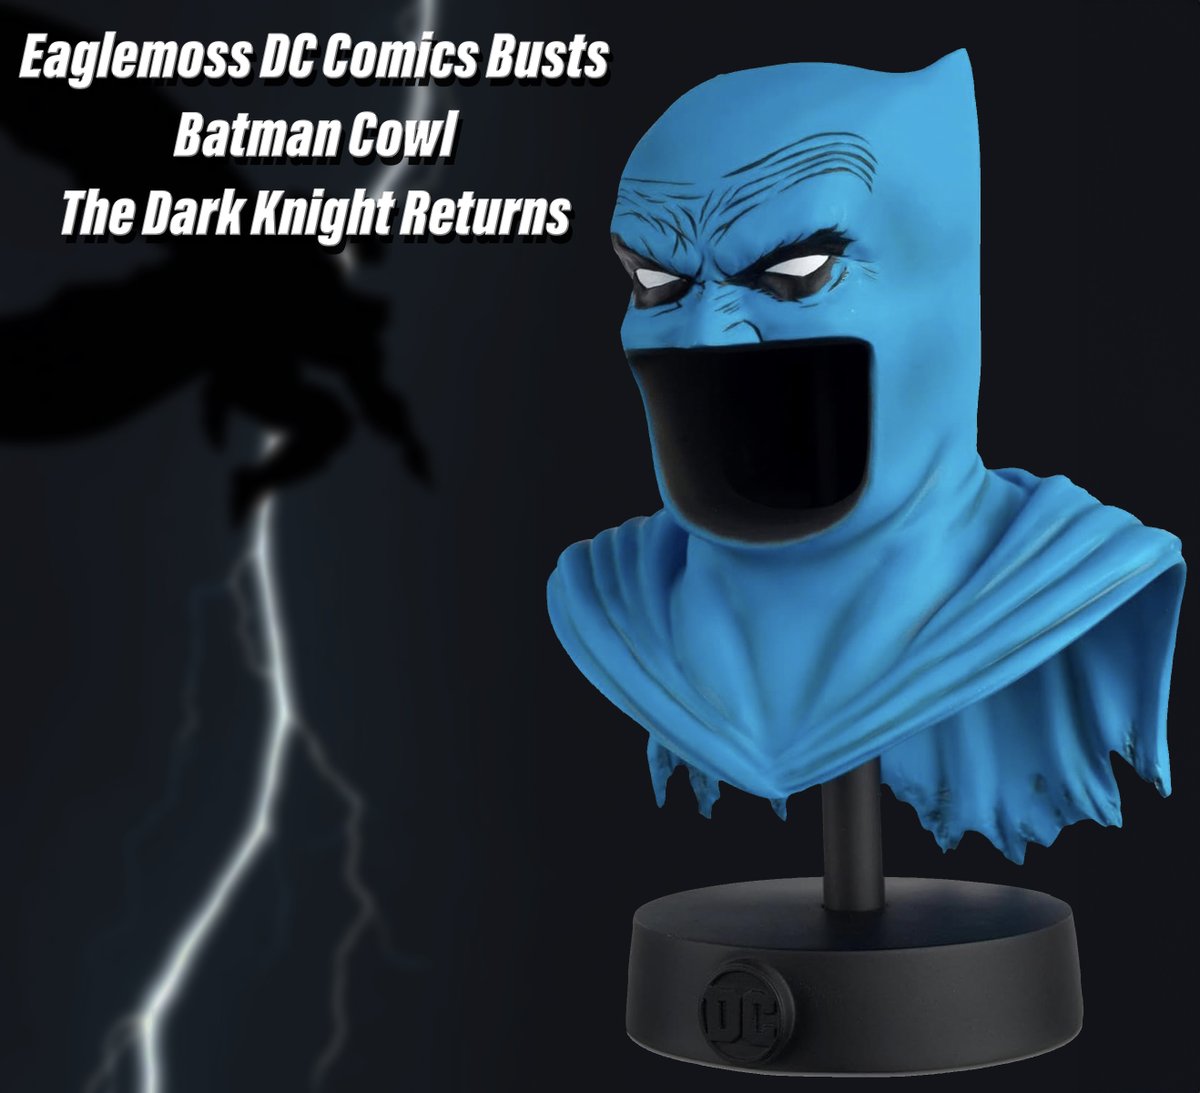 Eaglemoss DC Comics Busts | Batman Cowl (The Dark Knight Returns) Order info: amzn.to/3Wh3UIL Based on the iconic graphic novel.